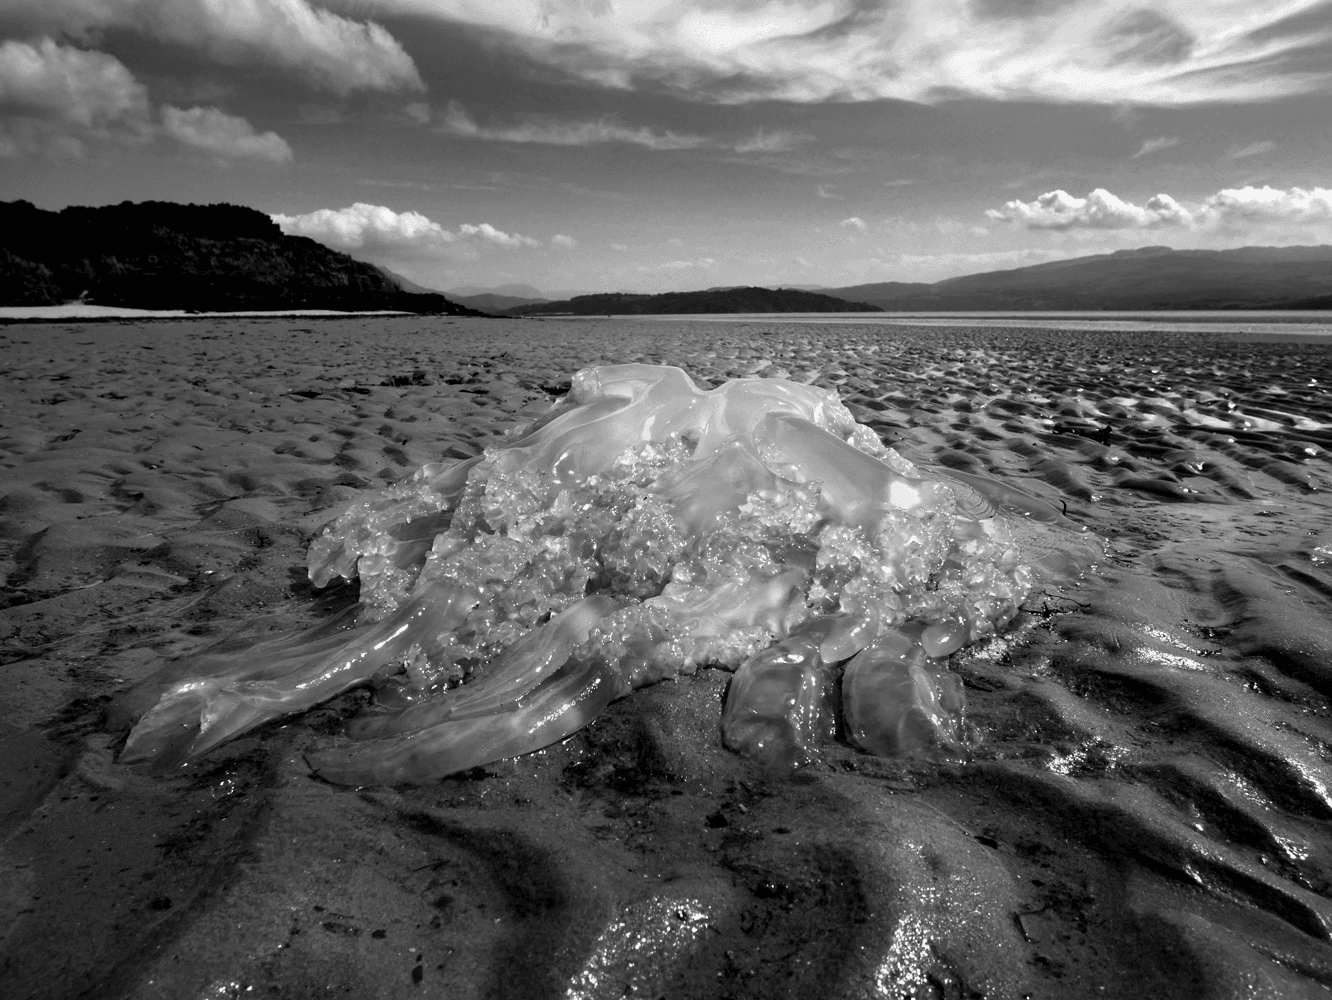 Beached Jellyfish at Low Tide